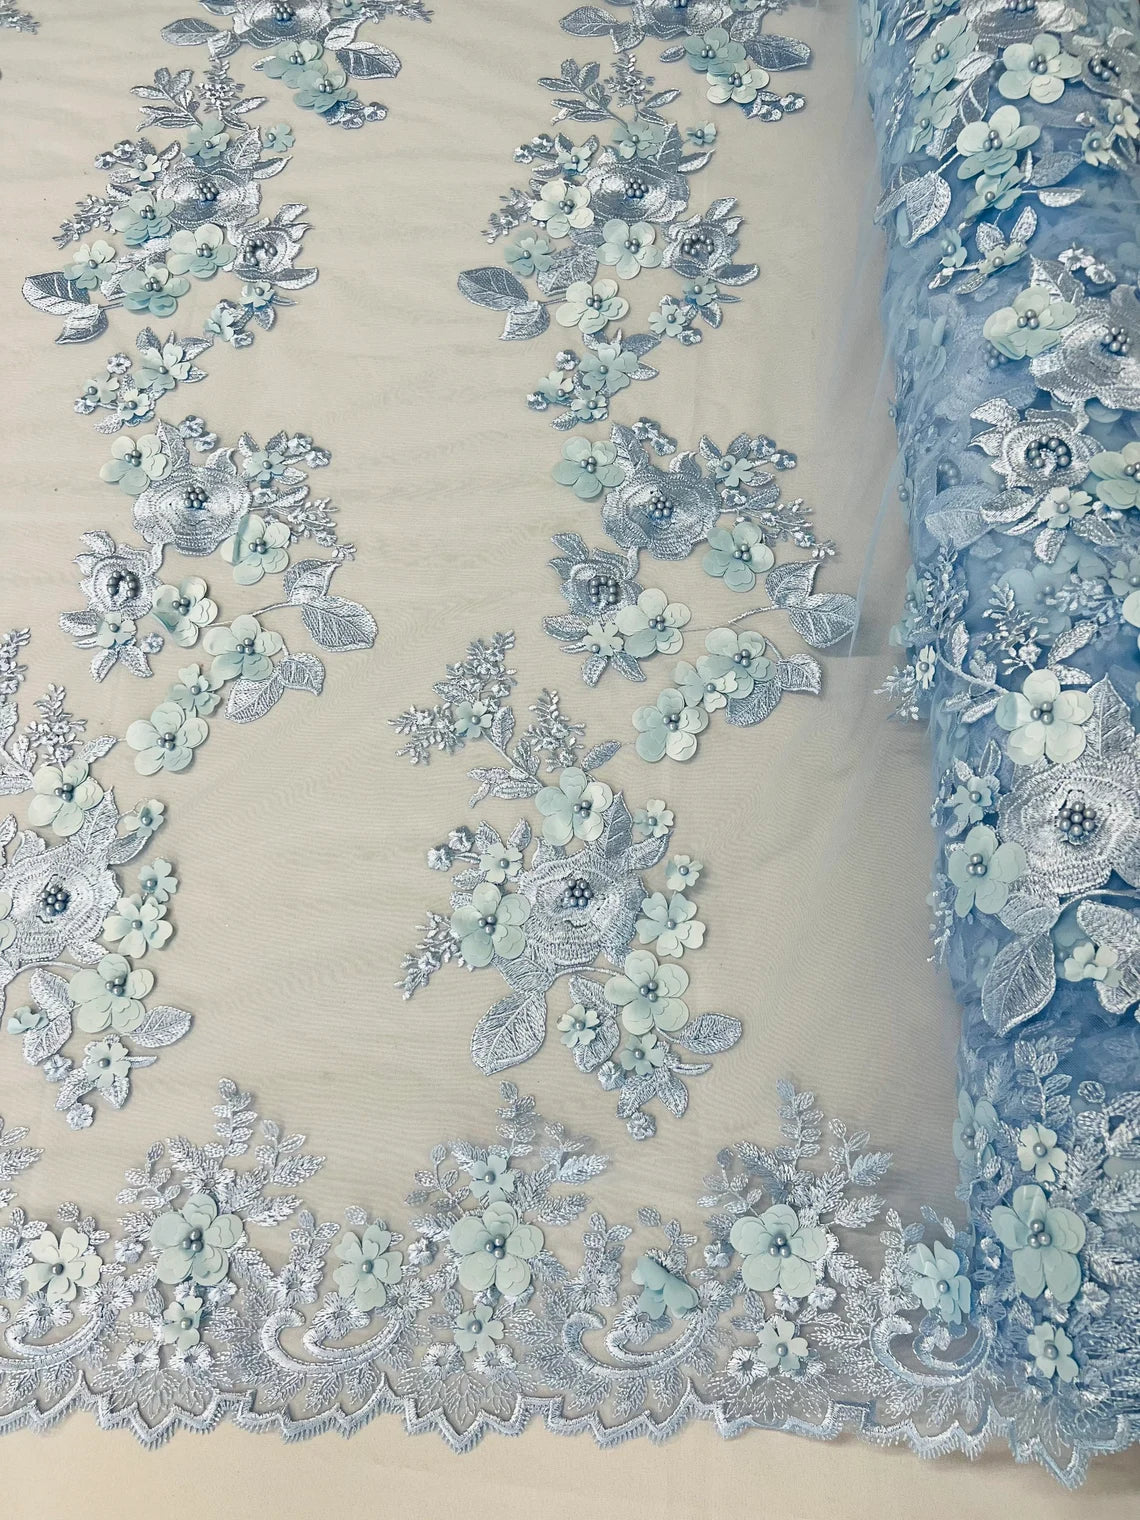 3D Flower Panels Fabric - Baby Blue - Flower Panels Bead Embroidered on Lace Fabric Sold By Yard